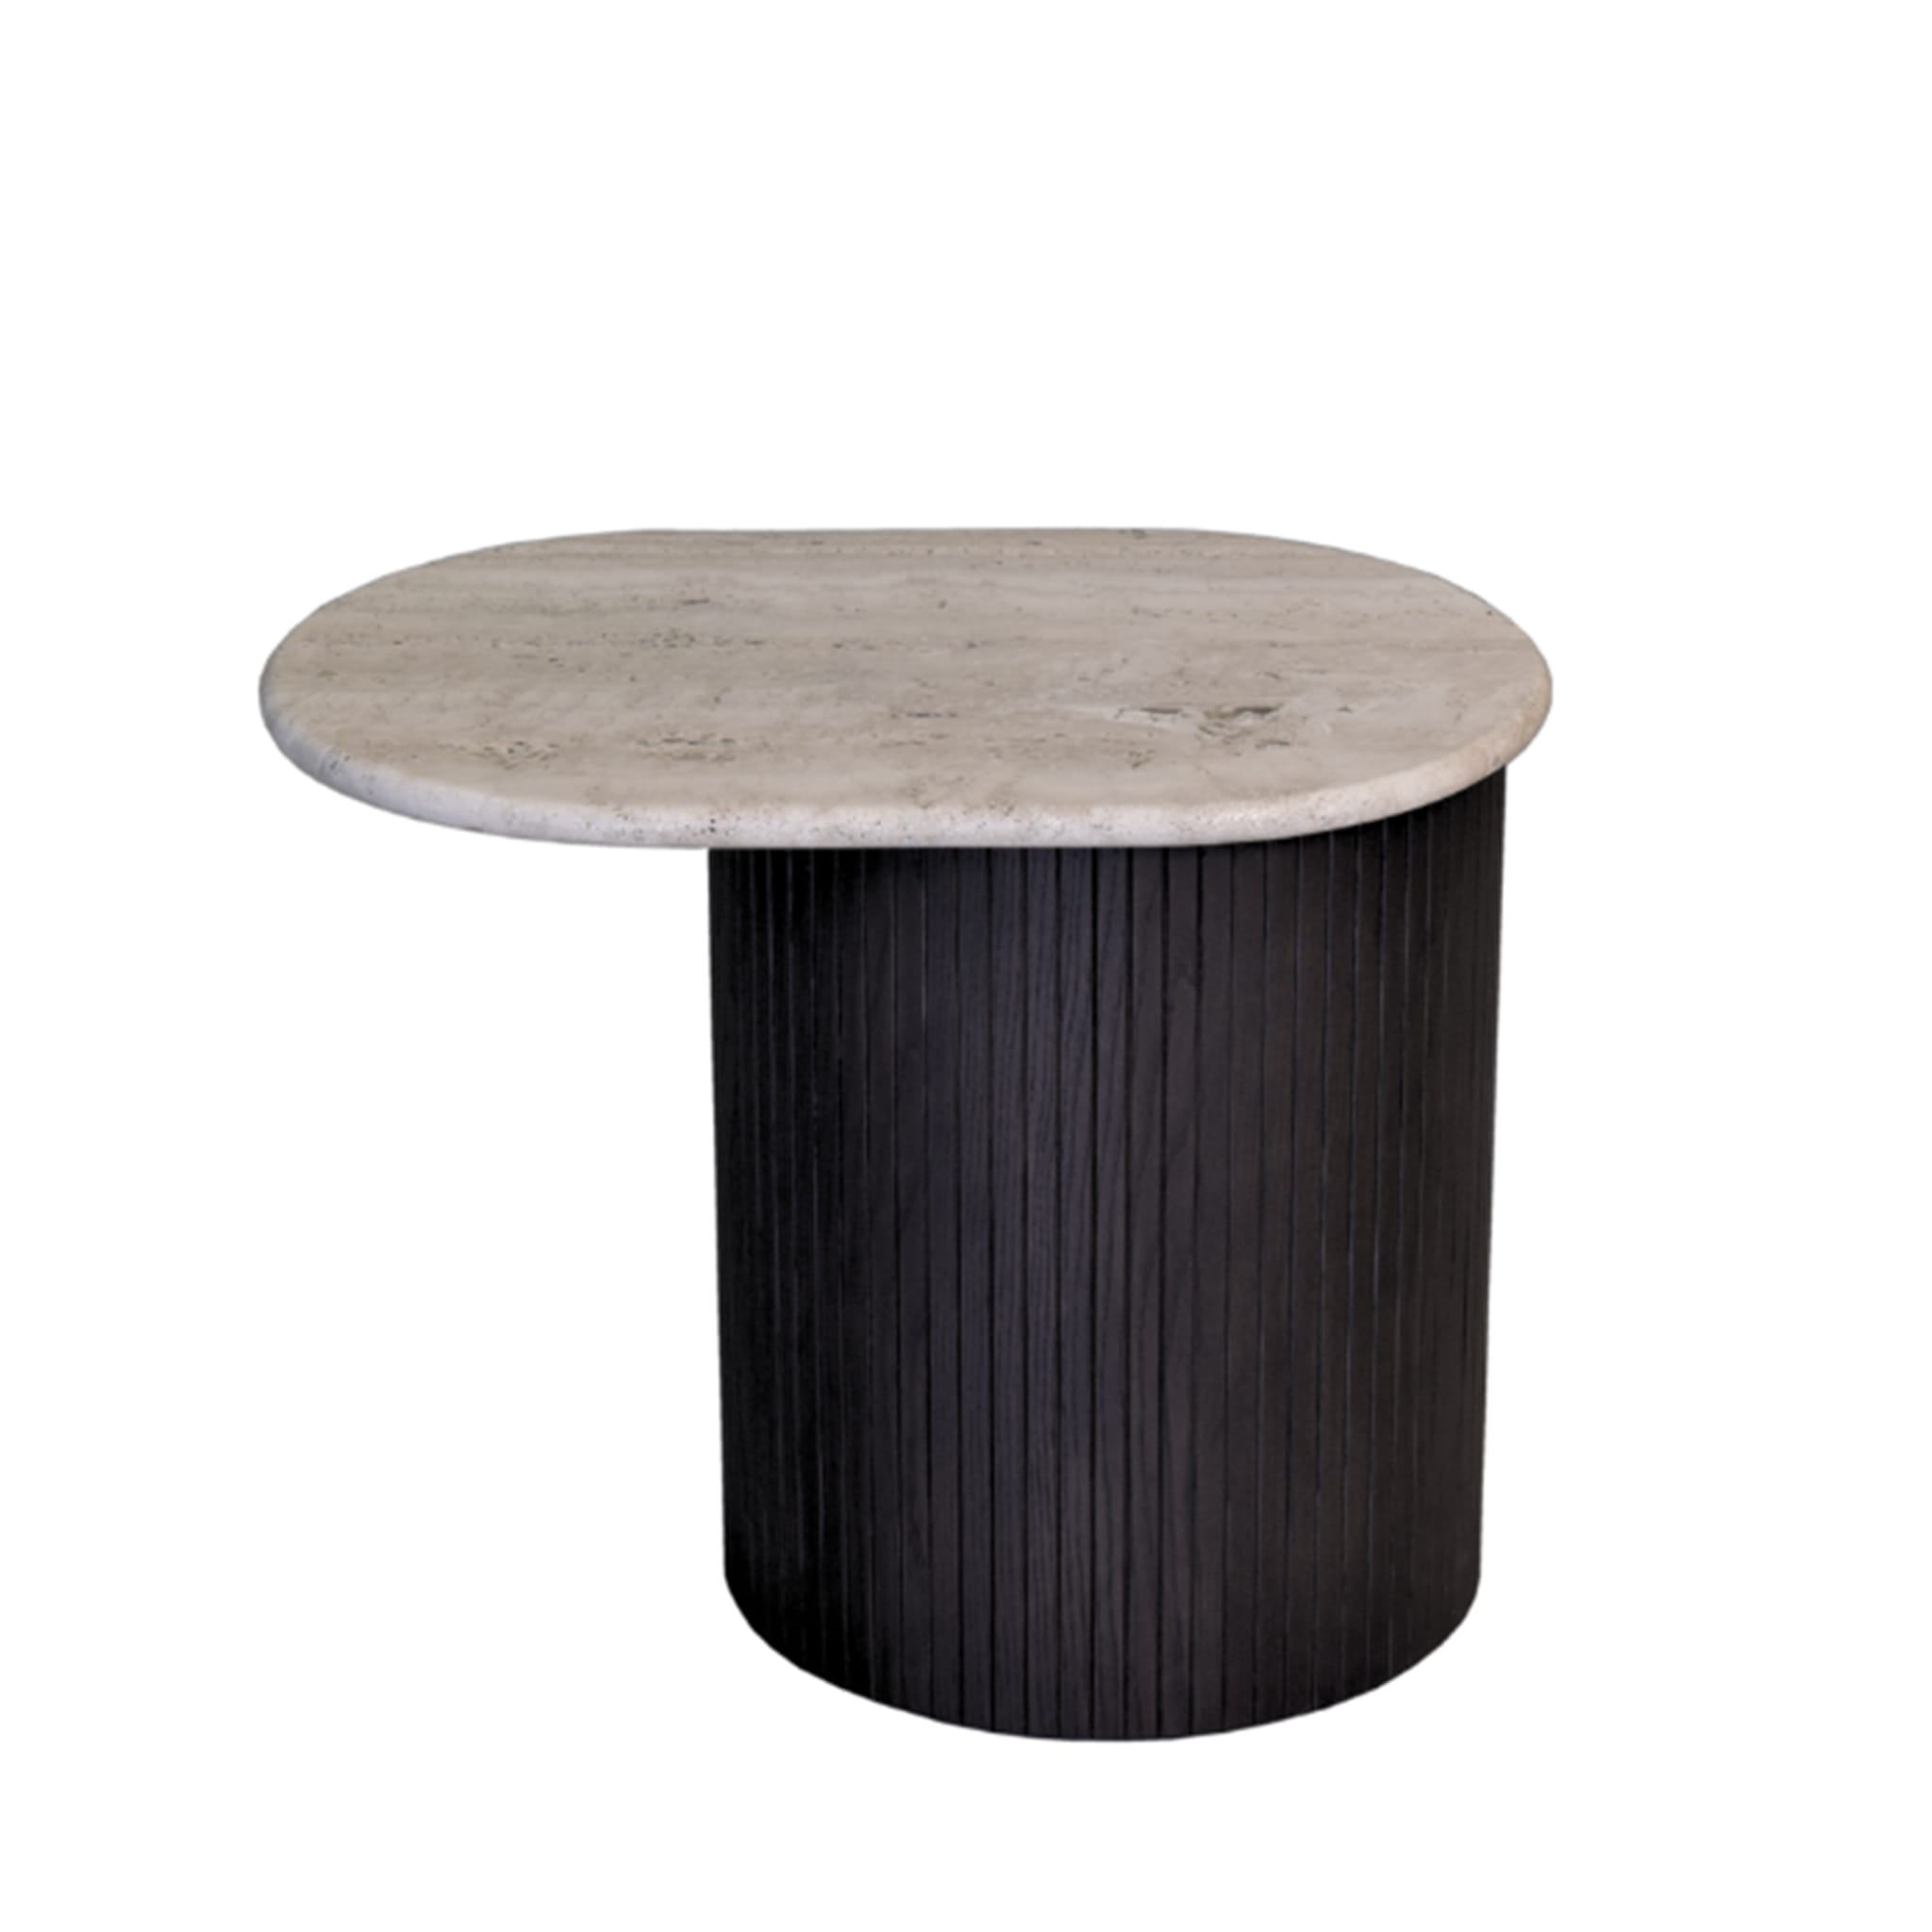 Bitta Side Table with Travertine Marble Top by Libero Rutilo - Alternative view 1